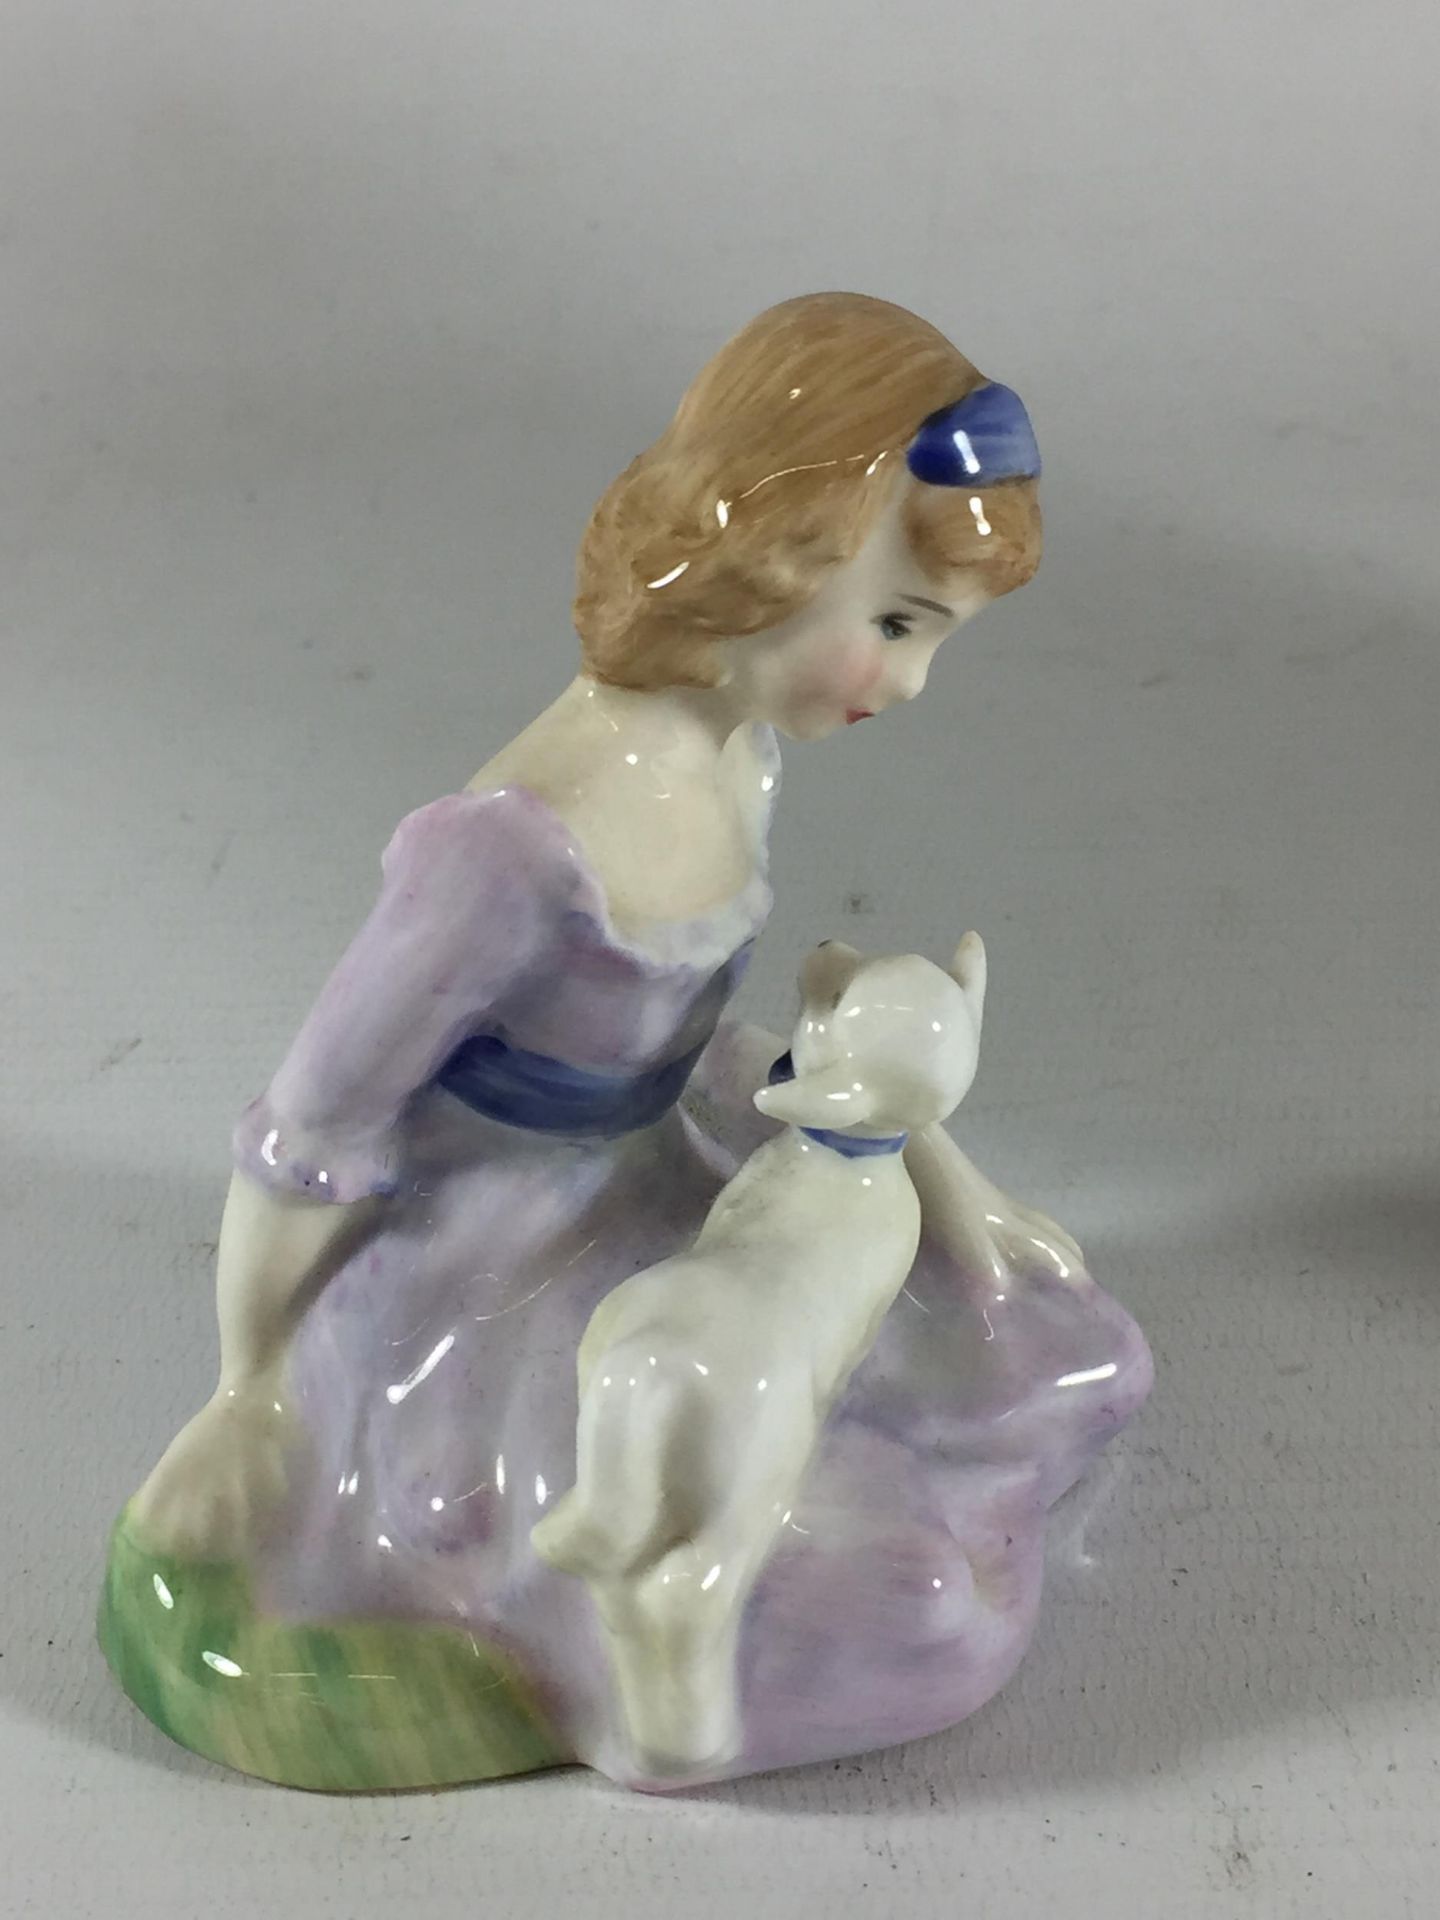 TWO ROYAL DOULTON LADY FIGURES - FAIR LADY HN2193 & MARY HAD A LITTLE LAMB HN2048 - Image 3 of 4